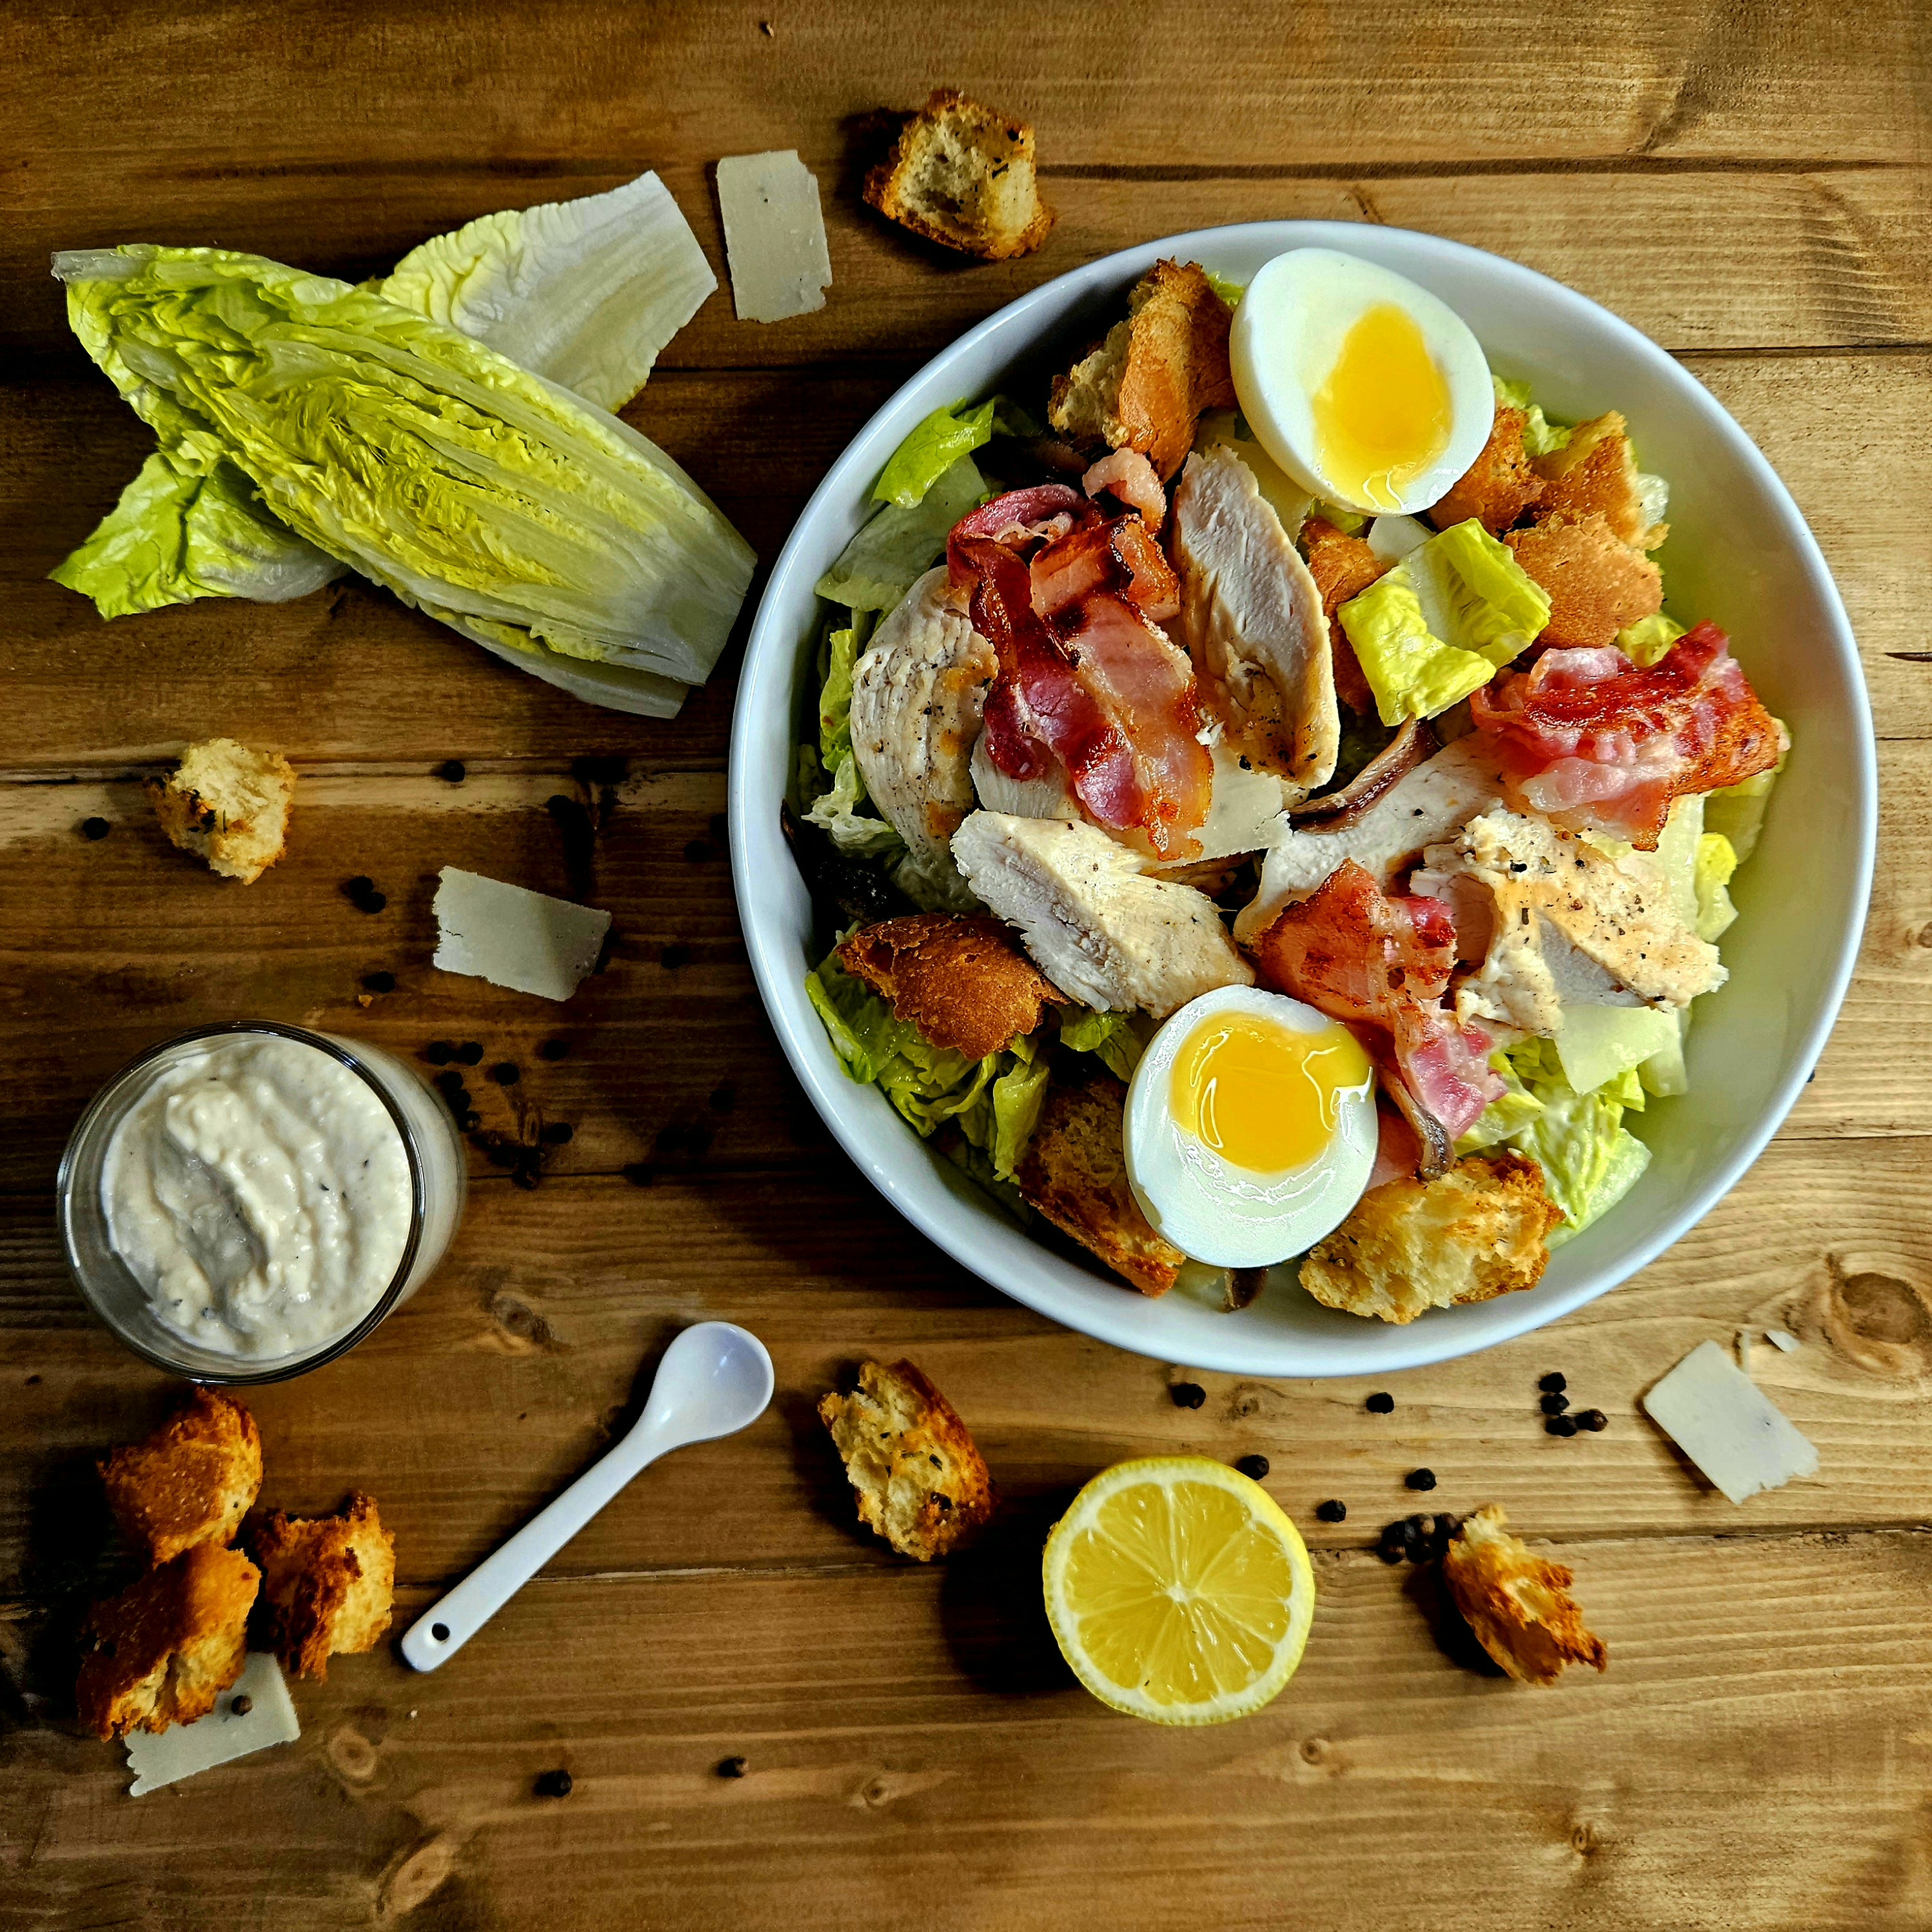 Classic Caesar Chicken with Homemade Dressing. The dish is topped with grilled chicken, bacon, anchovies, and a boiled egg.